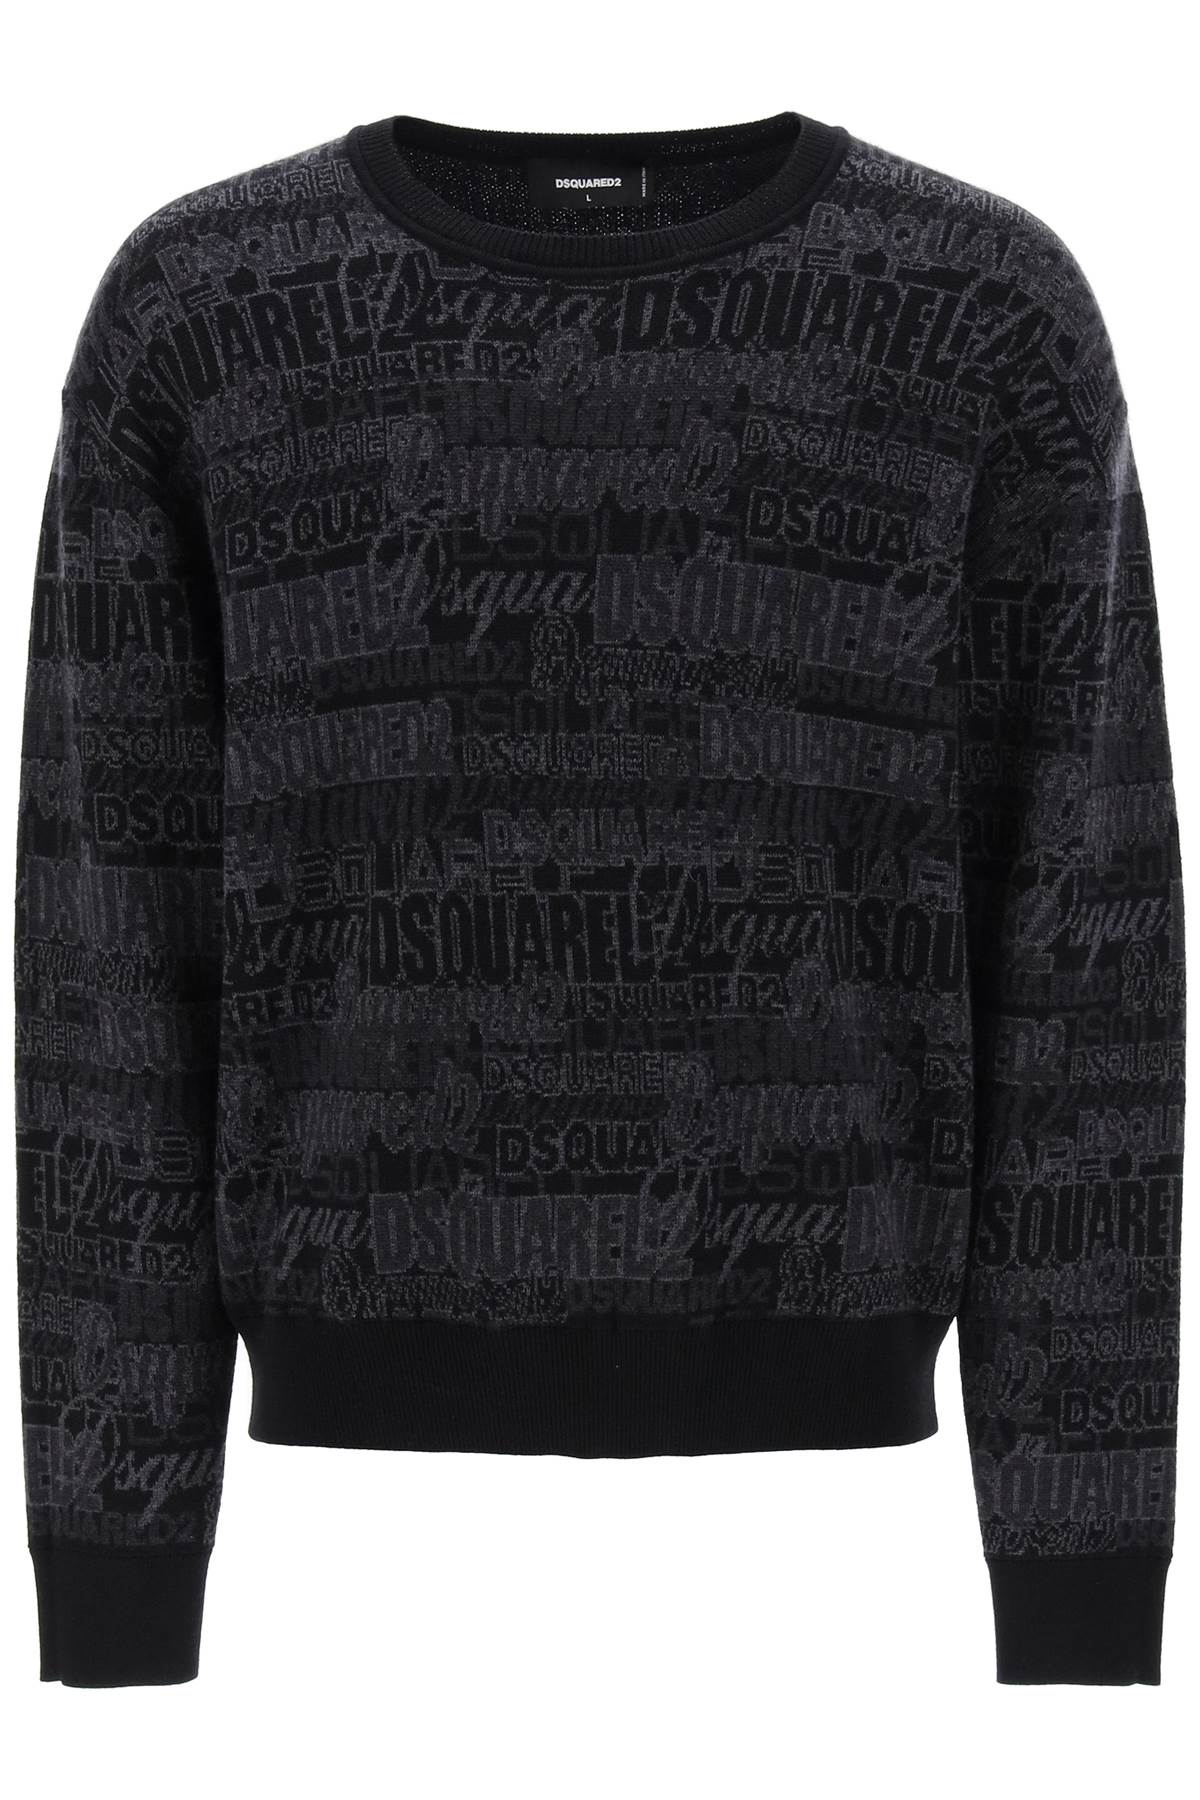 Dsquared2 wool sweater with logo lettering motif S74HA1385 S18339 BLACK GREY